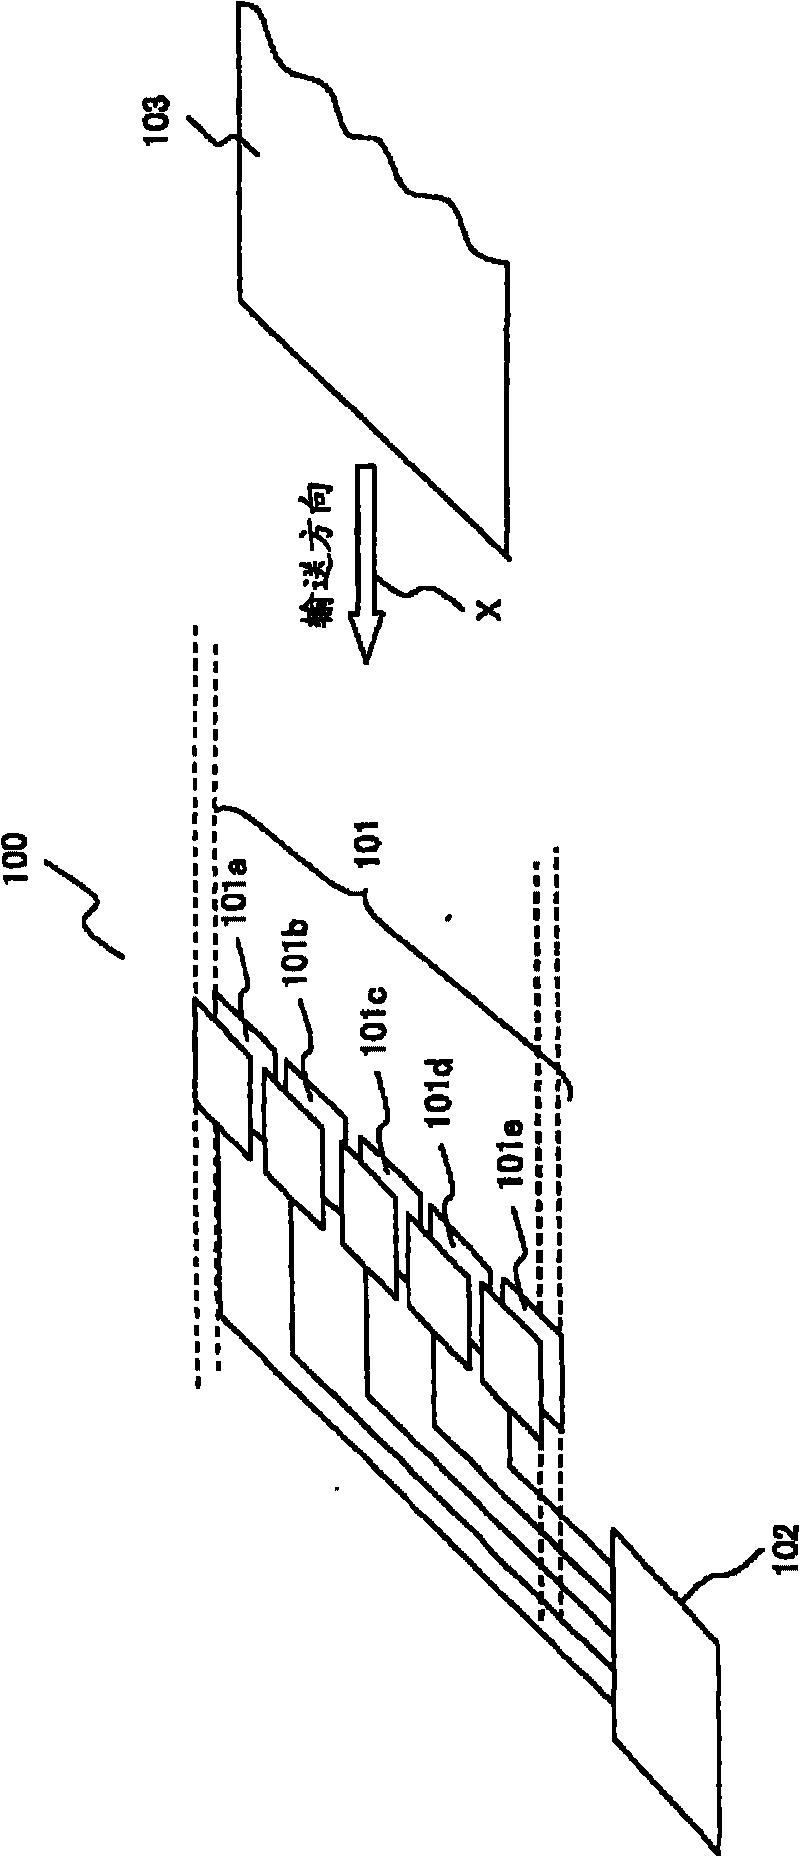 Paper sheet thickness detection device